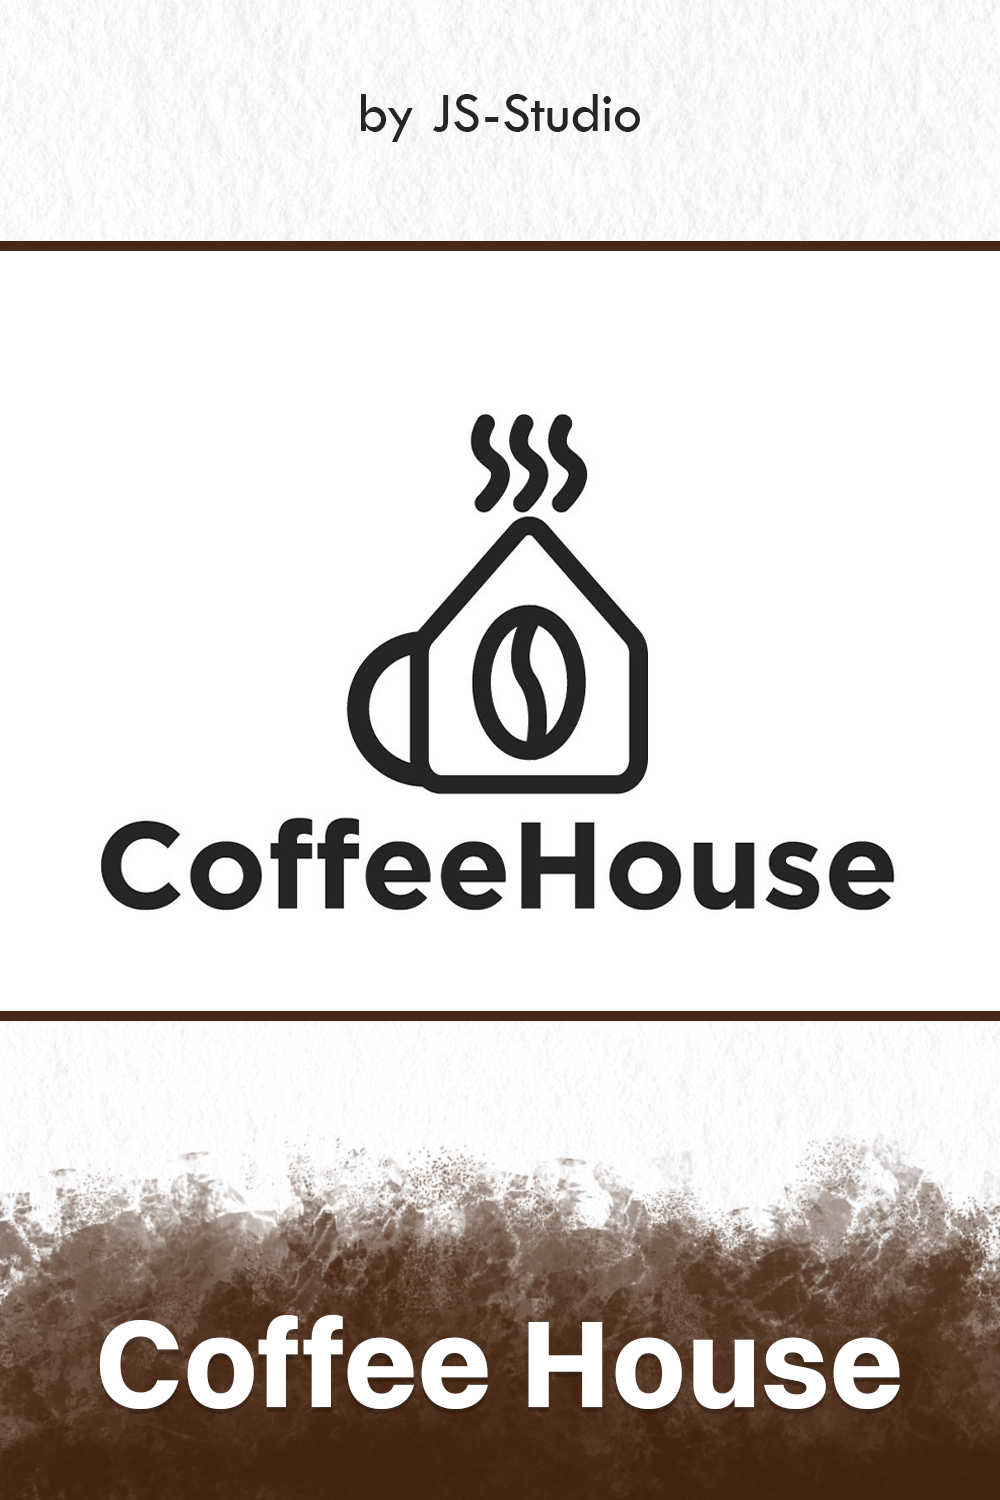 Coffee house logo in brown.